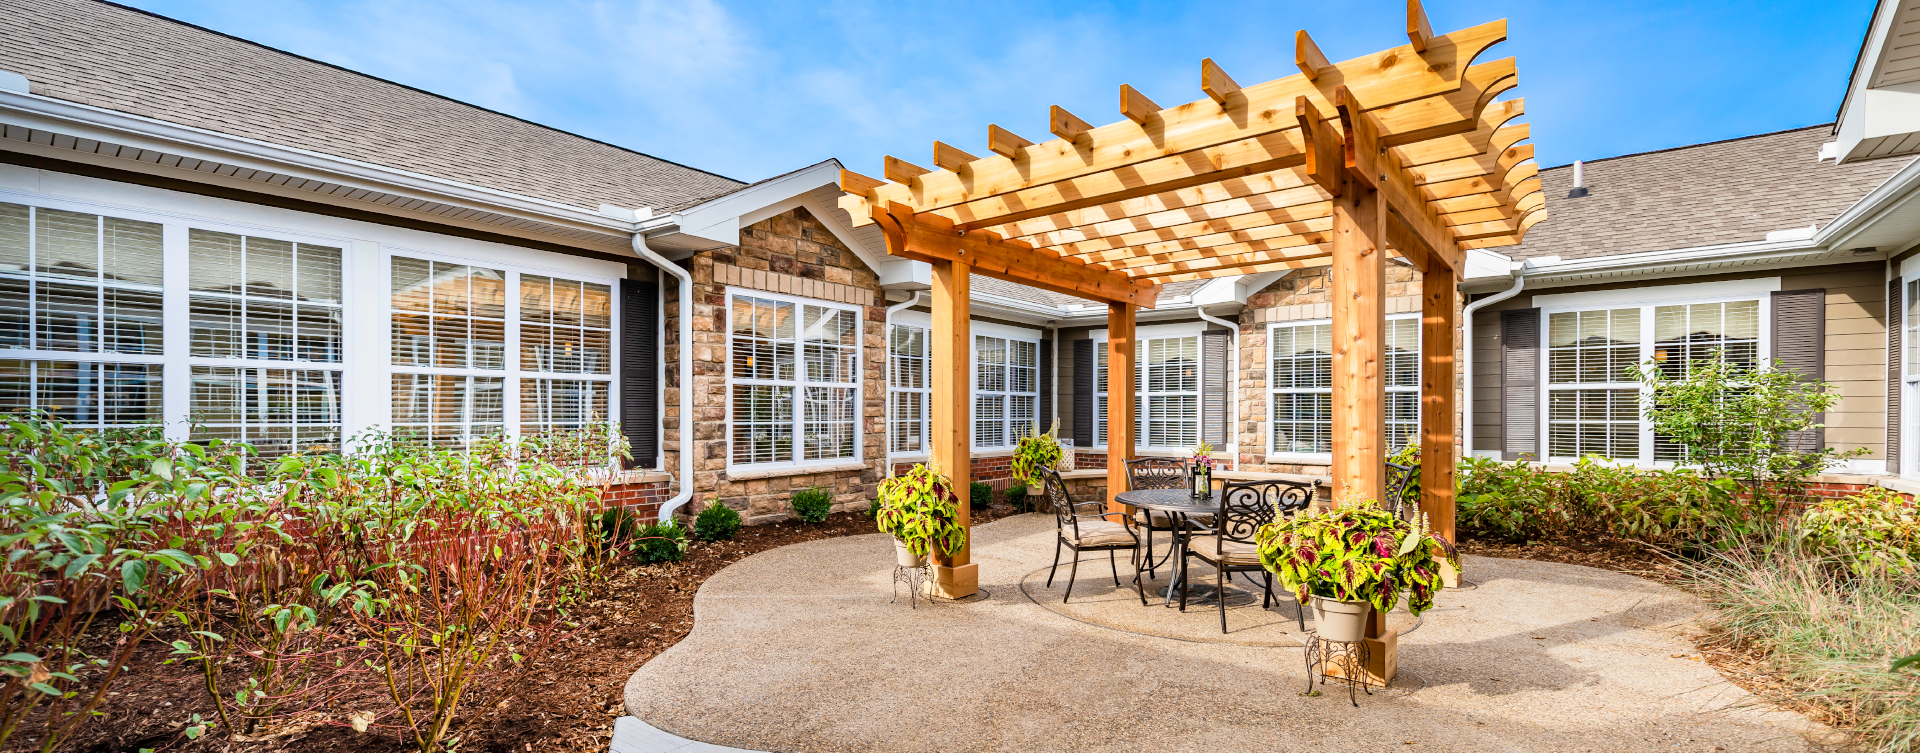 Residents with dementia can enjoy the outdoors by stepping into our secure courtyard at Bickford of Shelby Township